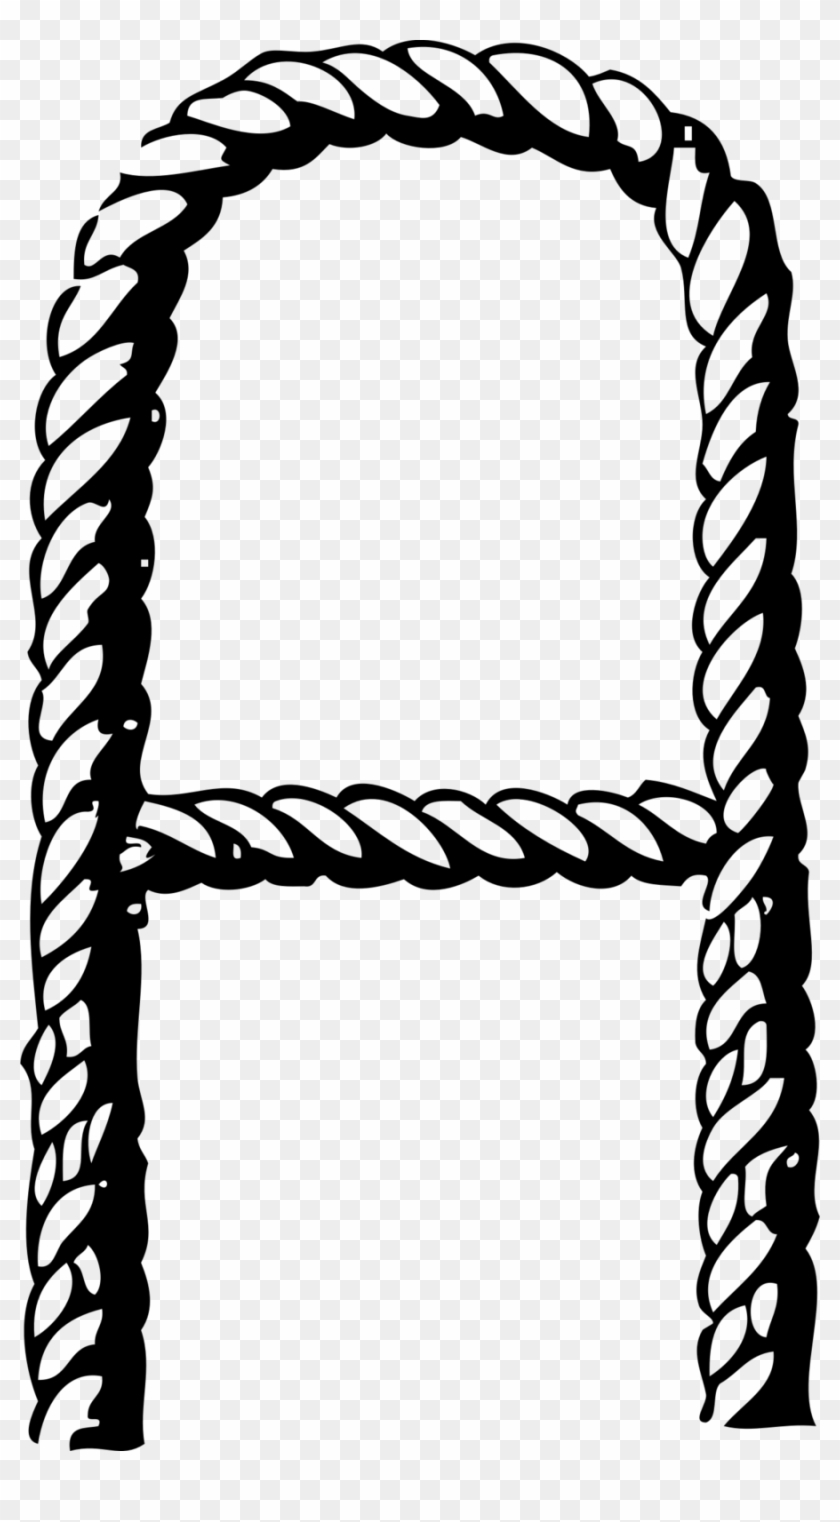 Download Knot Clipart Knot - Knot #1342136